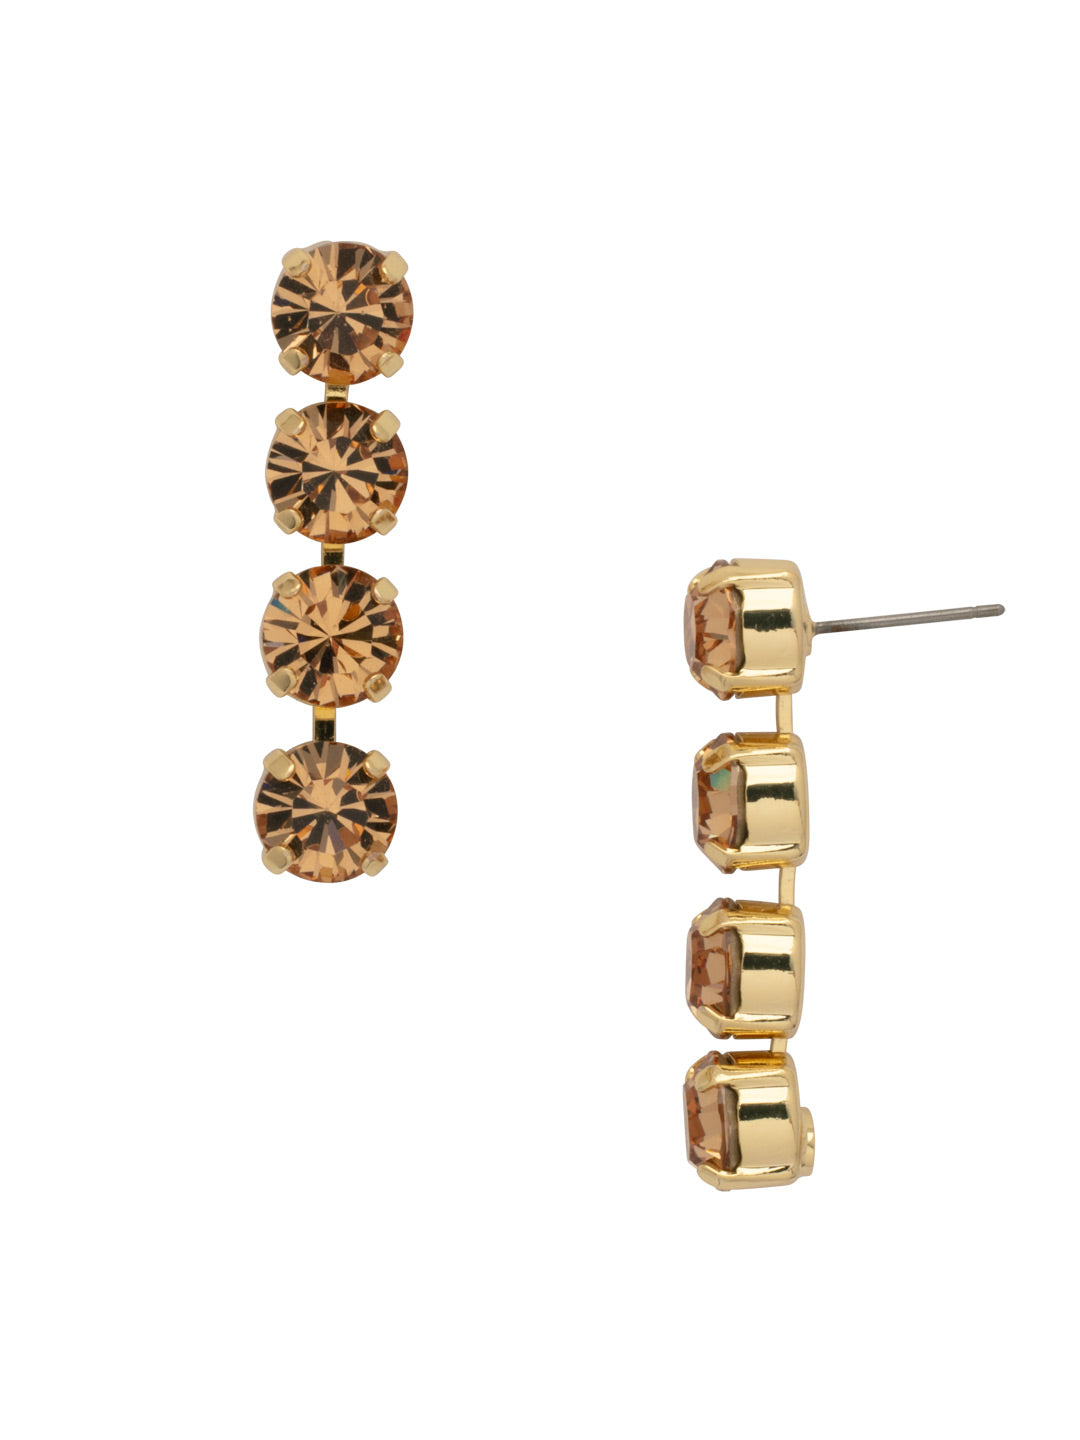 Matilda Dangle Earrings - EFH1BGLC - <p>The Matilda Dangle Earrings feature a row of 4 round cut crystals on a post. From Sorrelli's Light Colorado collection in our Bright Gold-tone finish.</p>